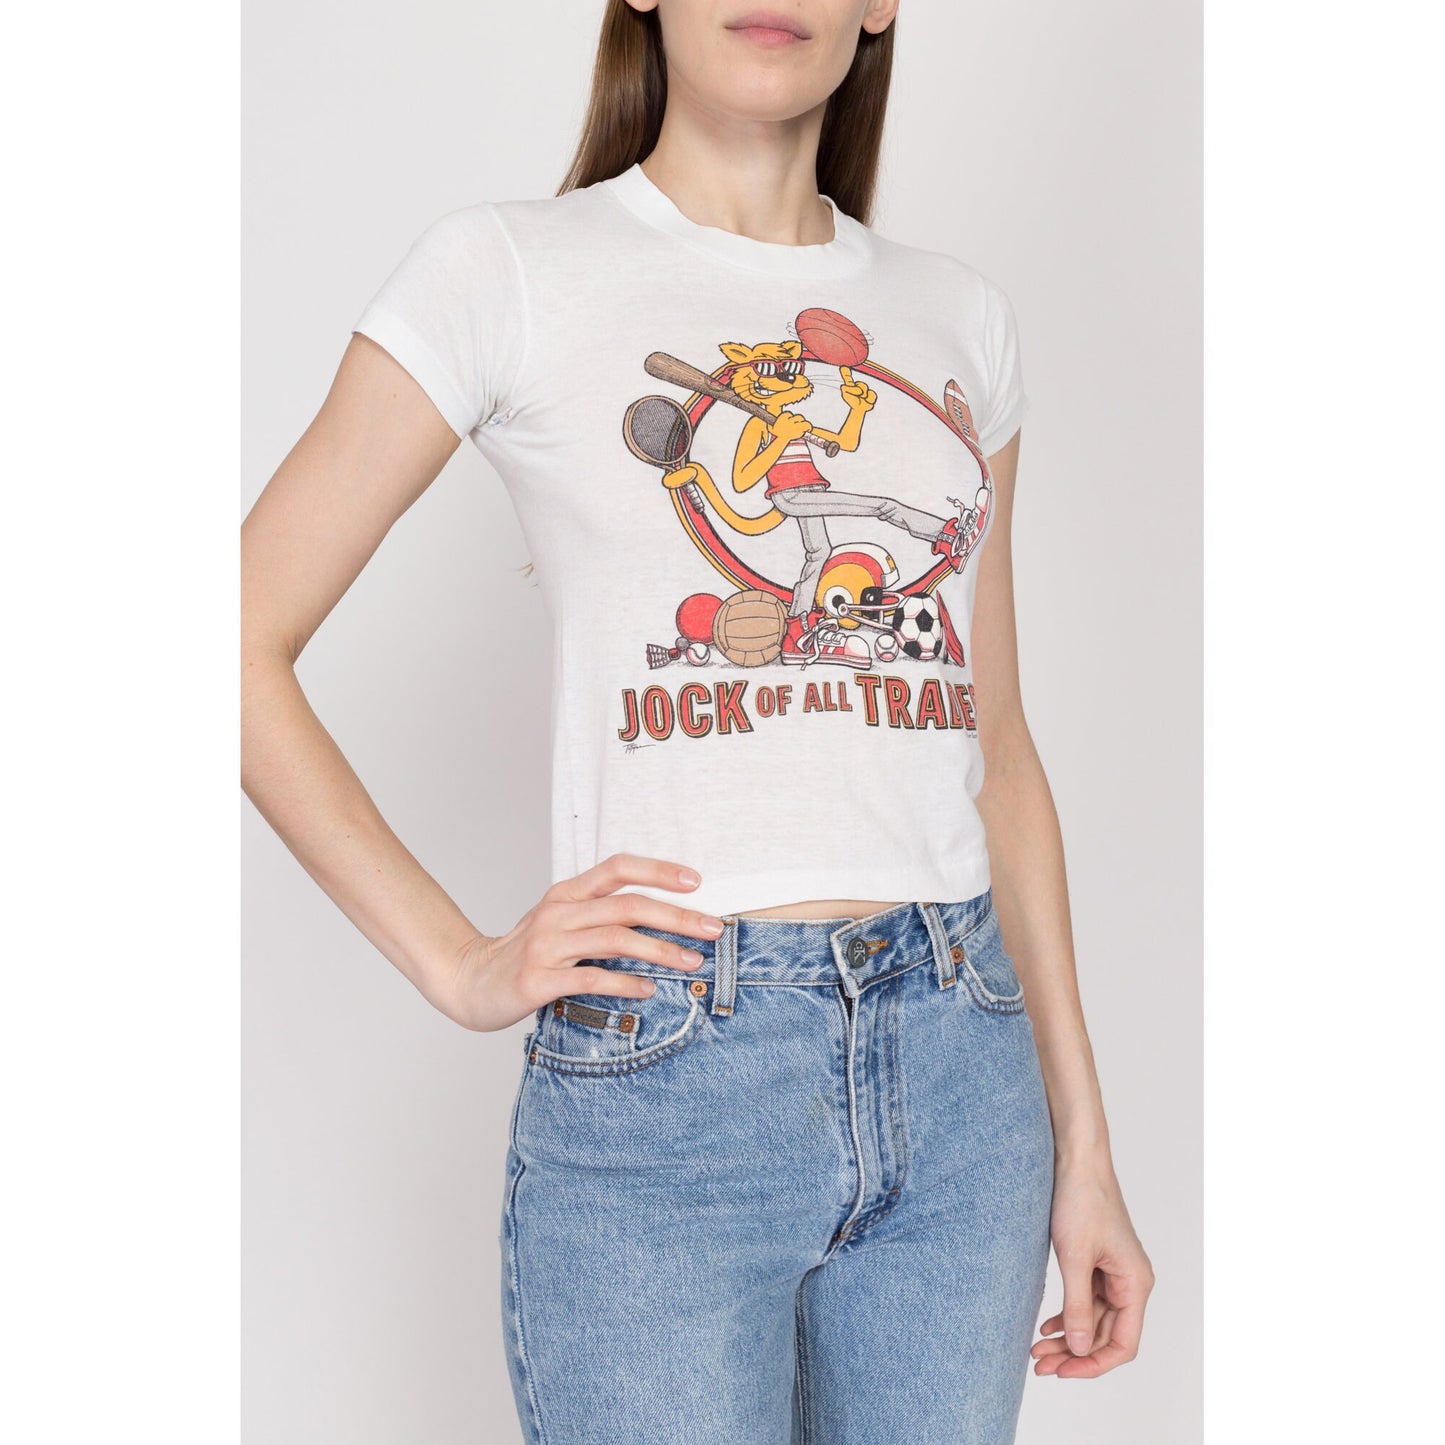 XXS-XS 80s "Jock Of All Trades" Cropped T Shirt | Vintage White Cartoon Cat Graphic Crop Top Tee